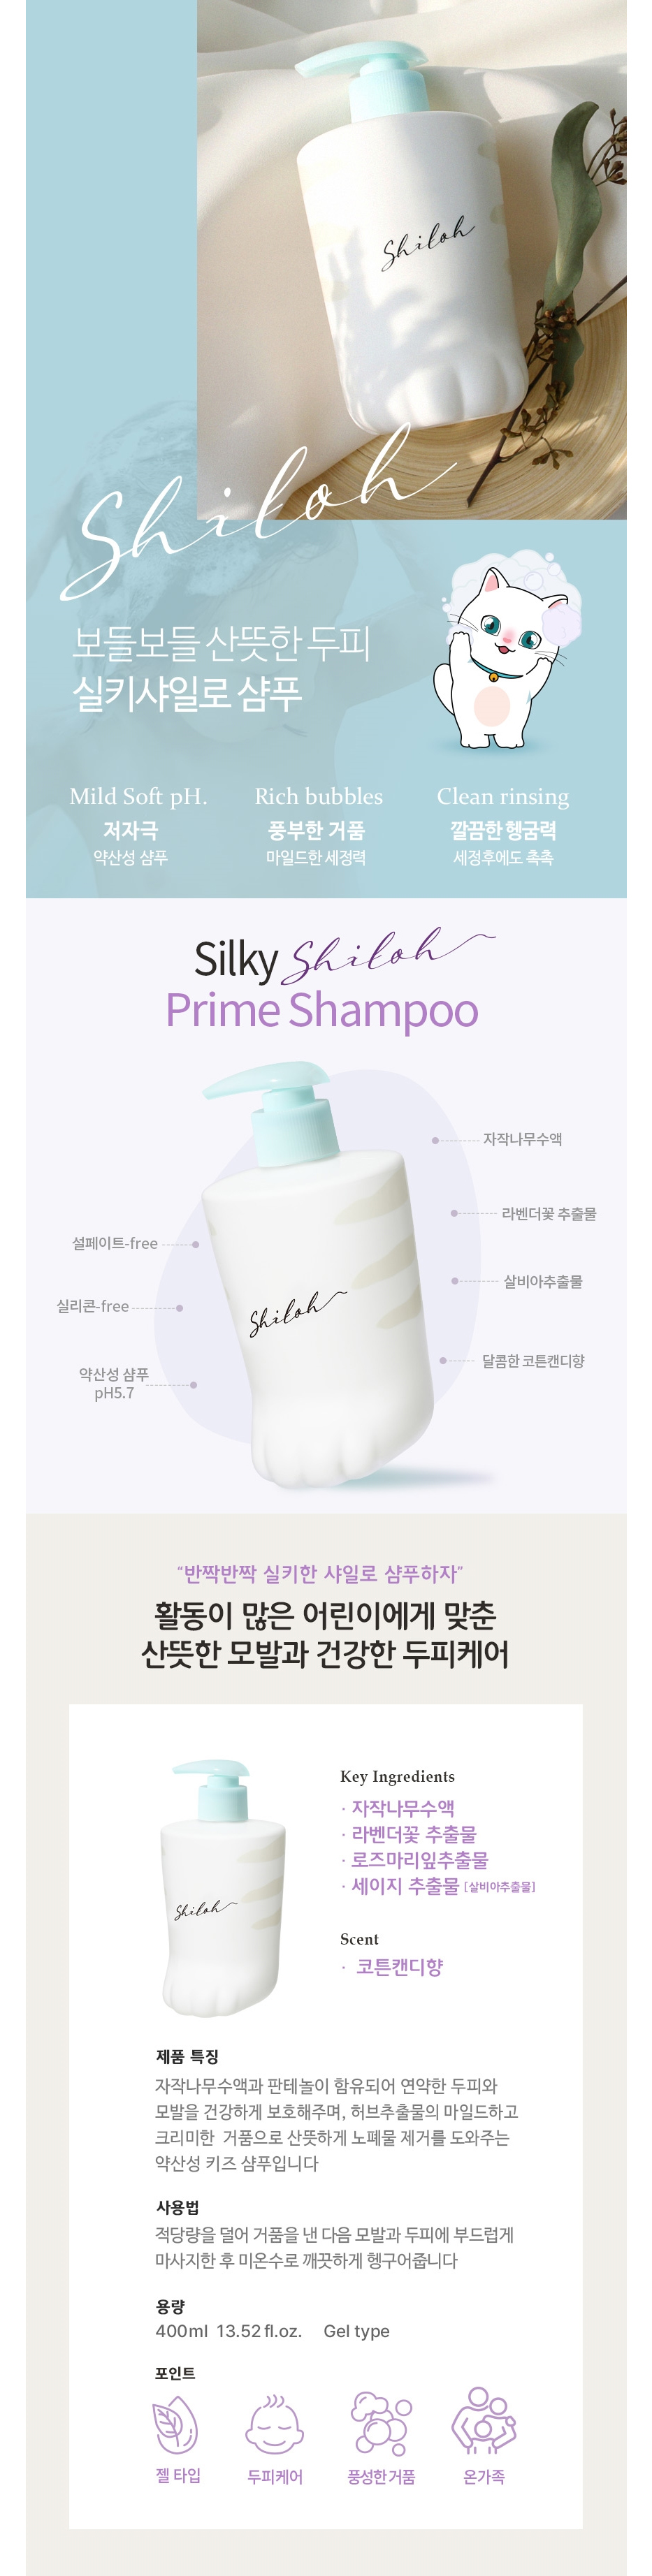 Cosmetic product image-S1L1